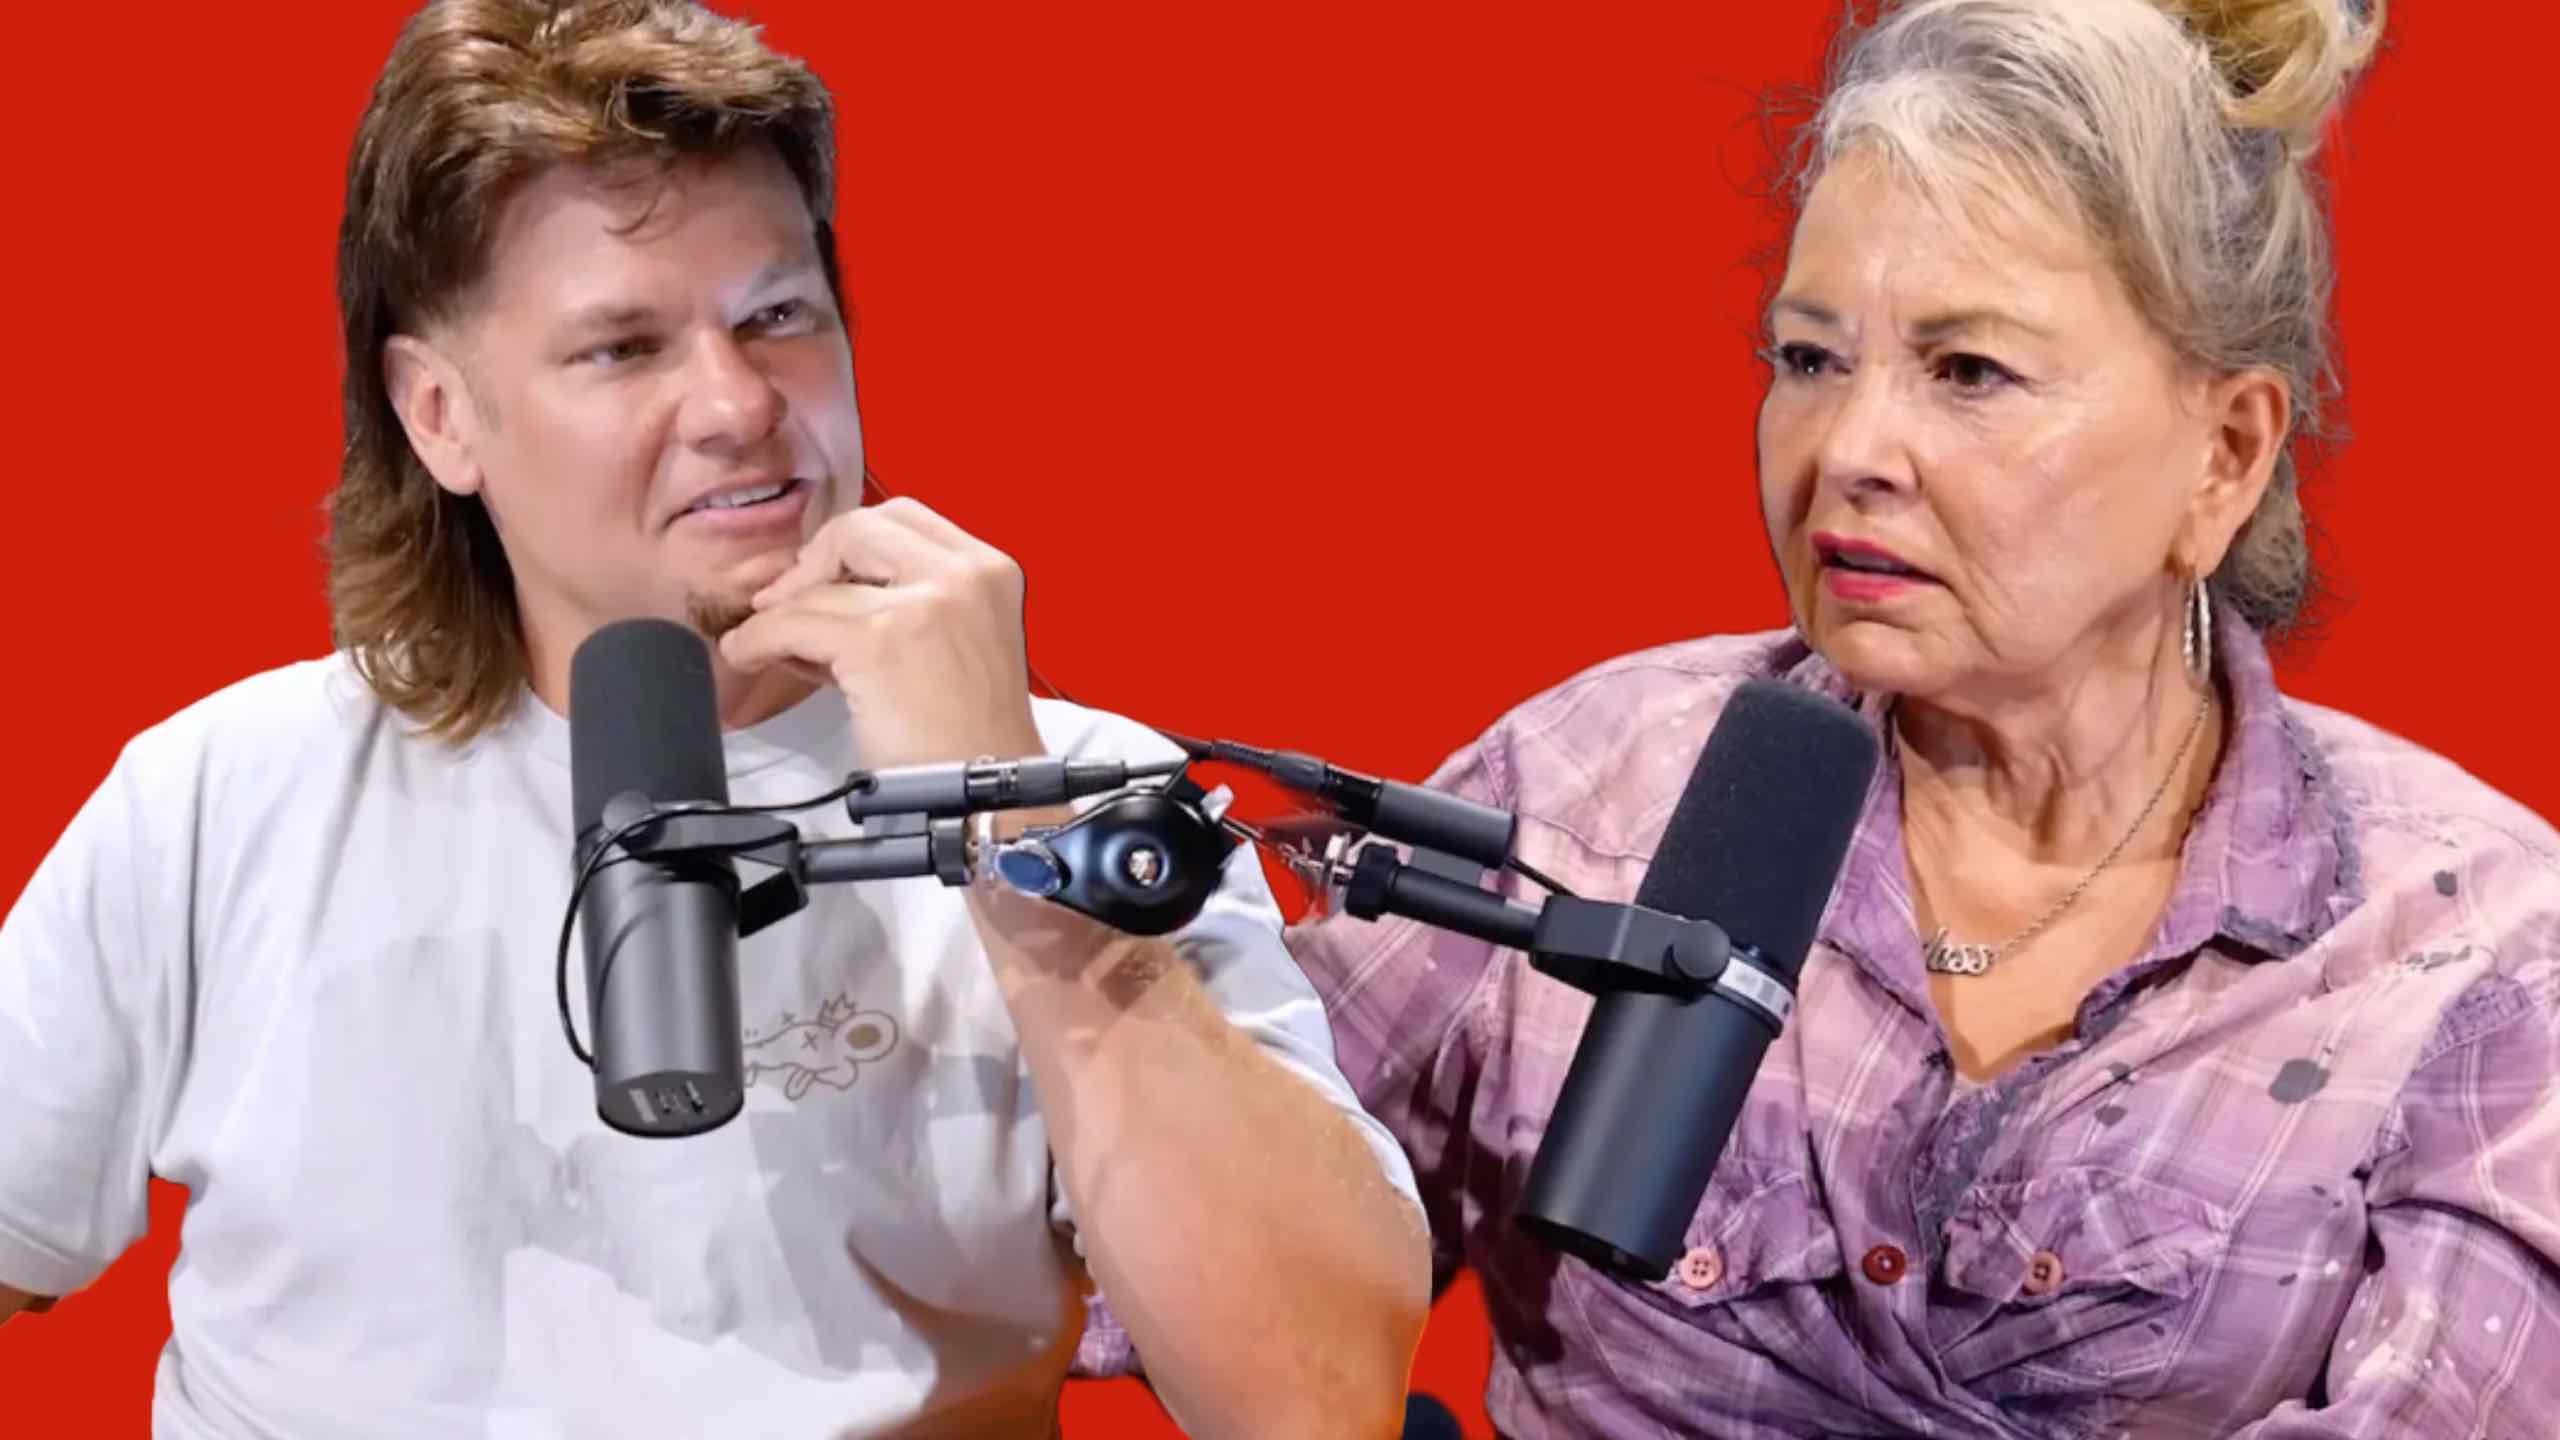 Featured image for “HERE’S THE REAL REASON ROSEANNE NEEDS TO BE CANCELED AGAIN. (MAYBE TAKE THEO VON OUT TOO!)”